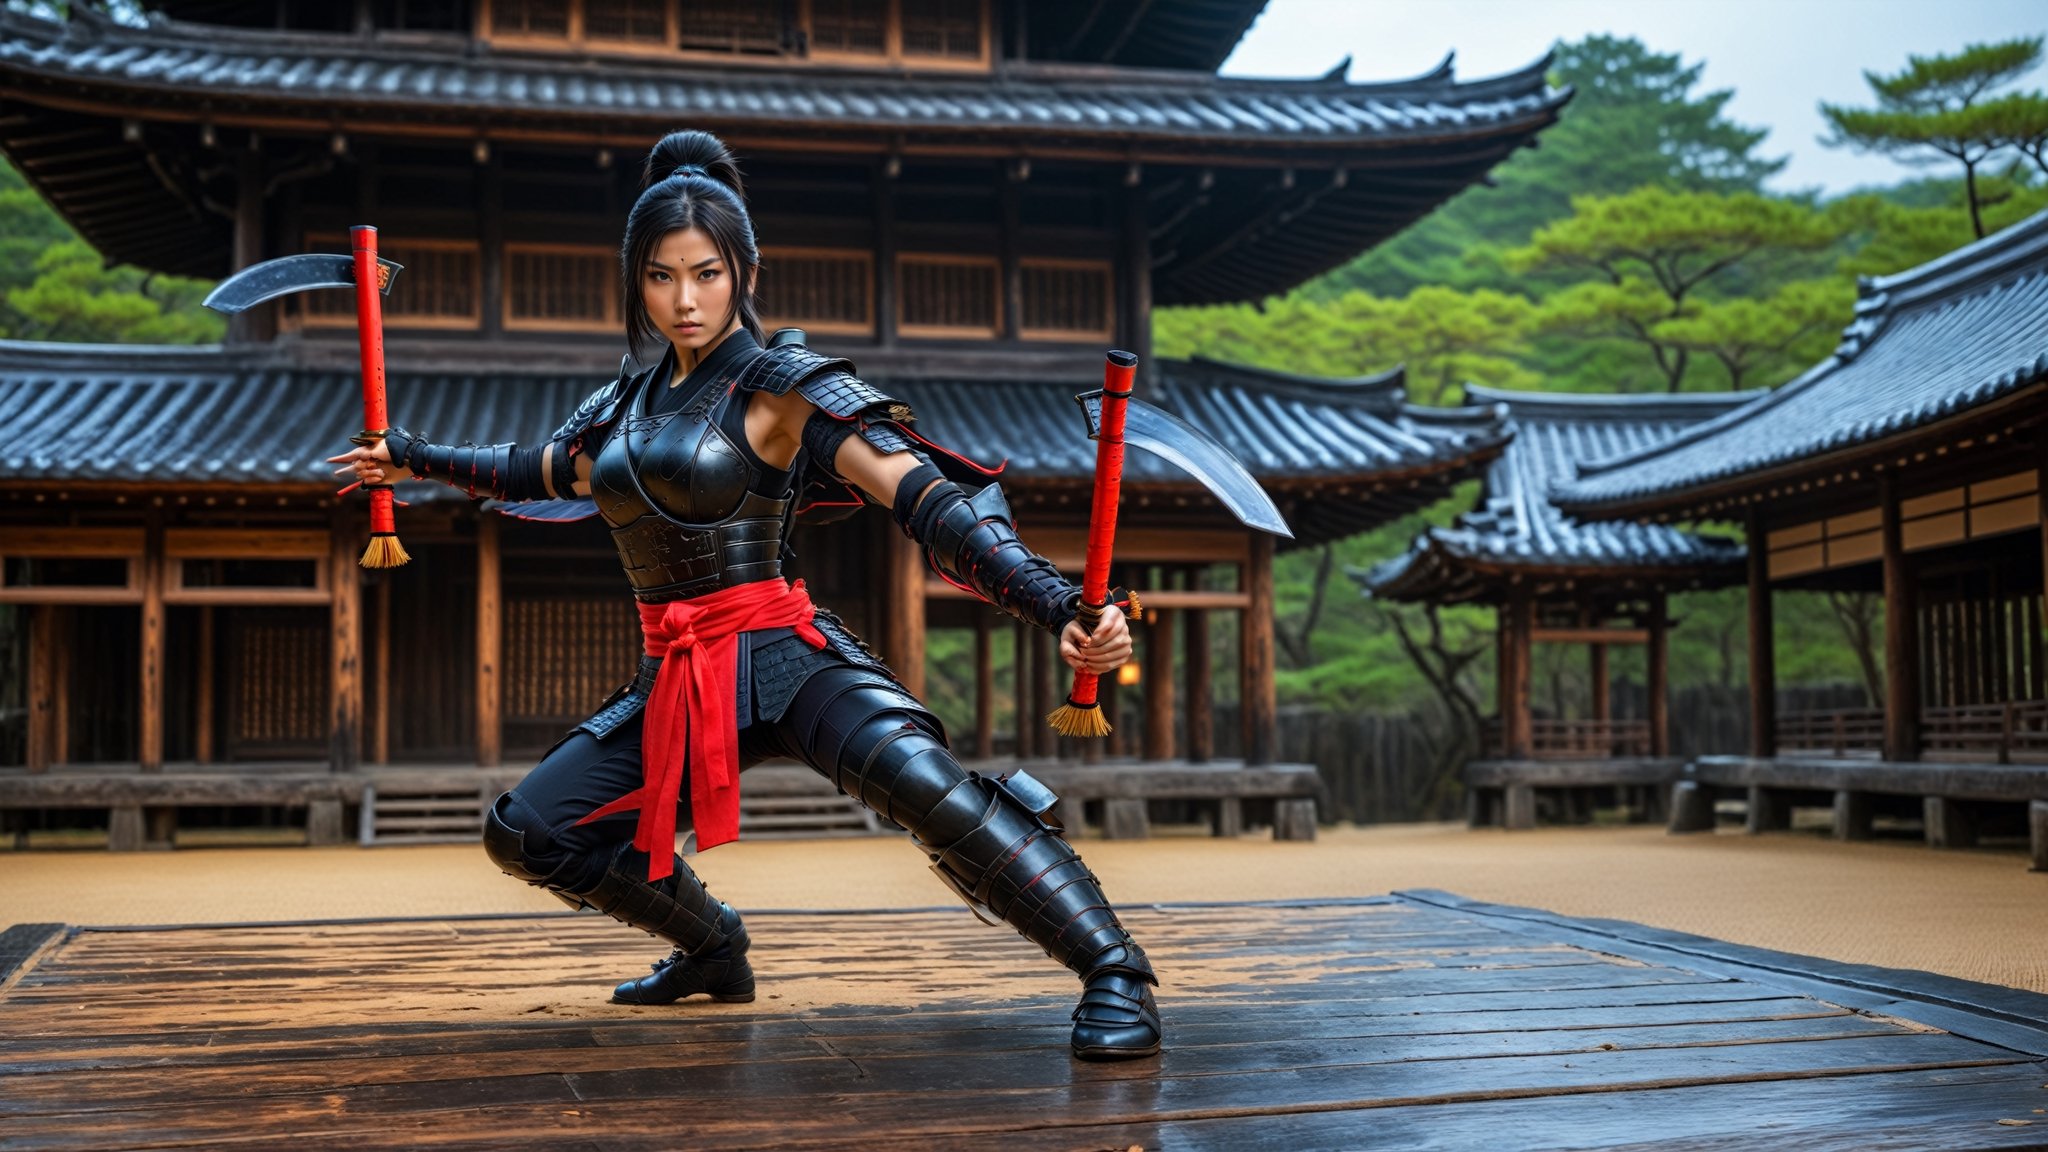 photographic, super realistic, masterpiece, 4K, HDR, quality image, cinematic, 
action_pose, 
fantasy, 
"a female ninja in black armor holding Kama stands ready for battle at in an ancient japanese wooden temple.", wet ground